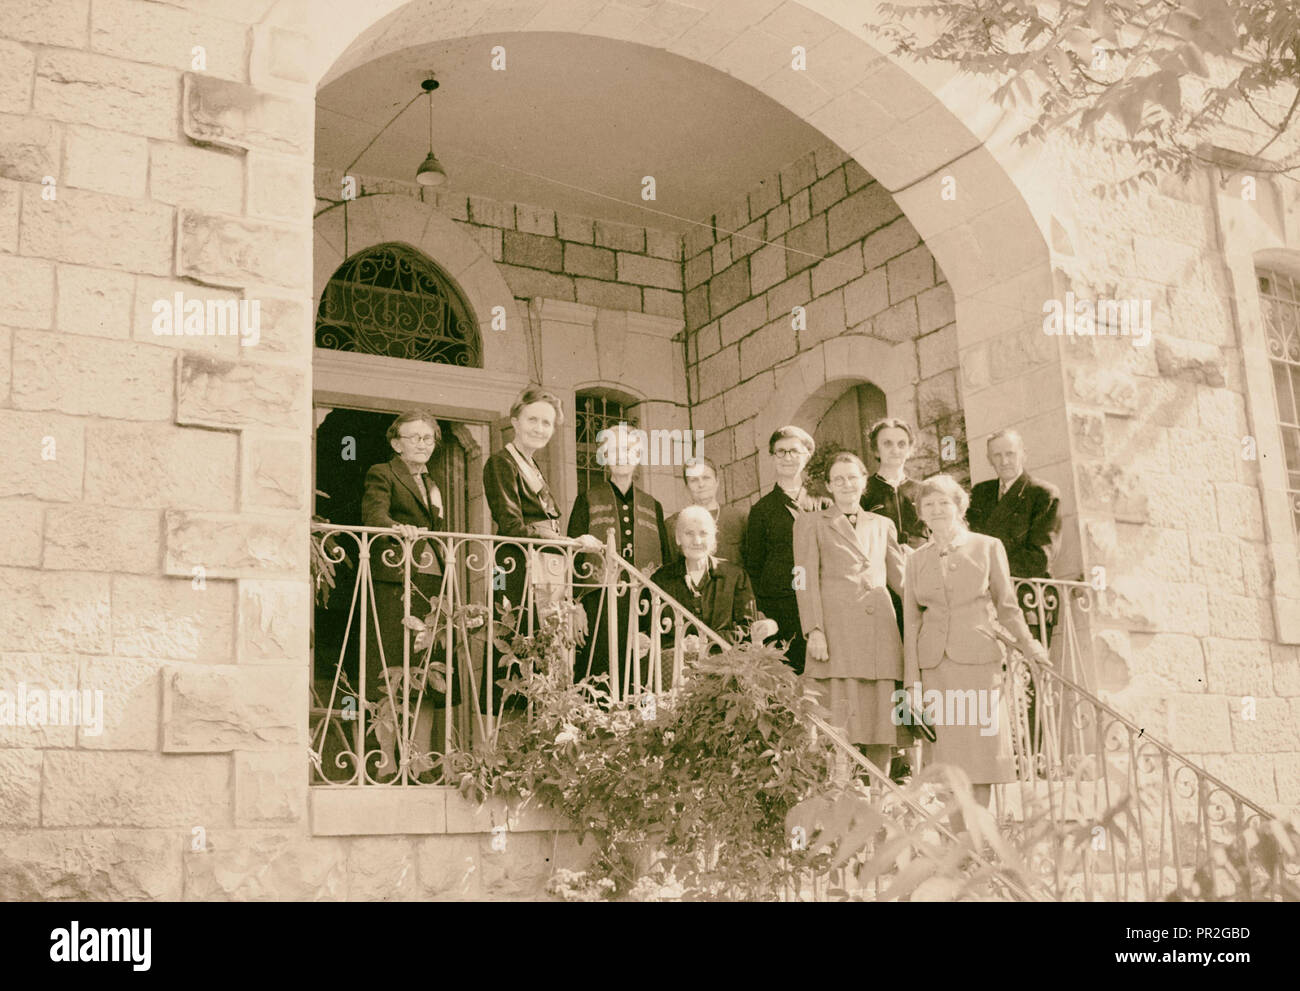 Swedish group, May 10, 1946, those from Dalarna remaining in colony of original group American Colony 1946, Jerusalem, Israel Stock Photo